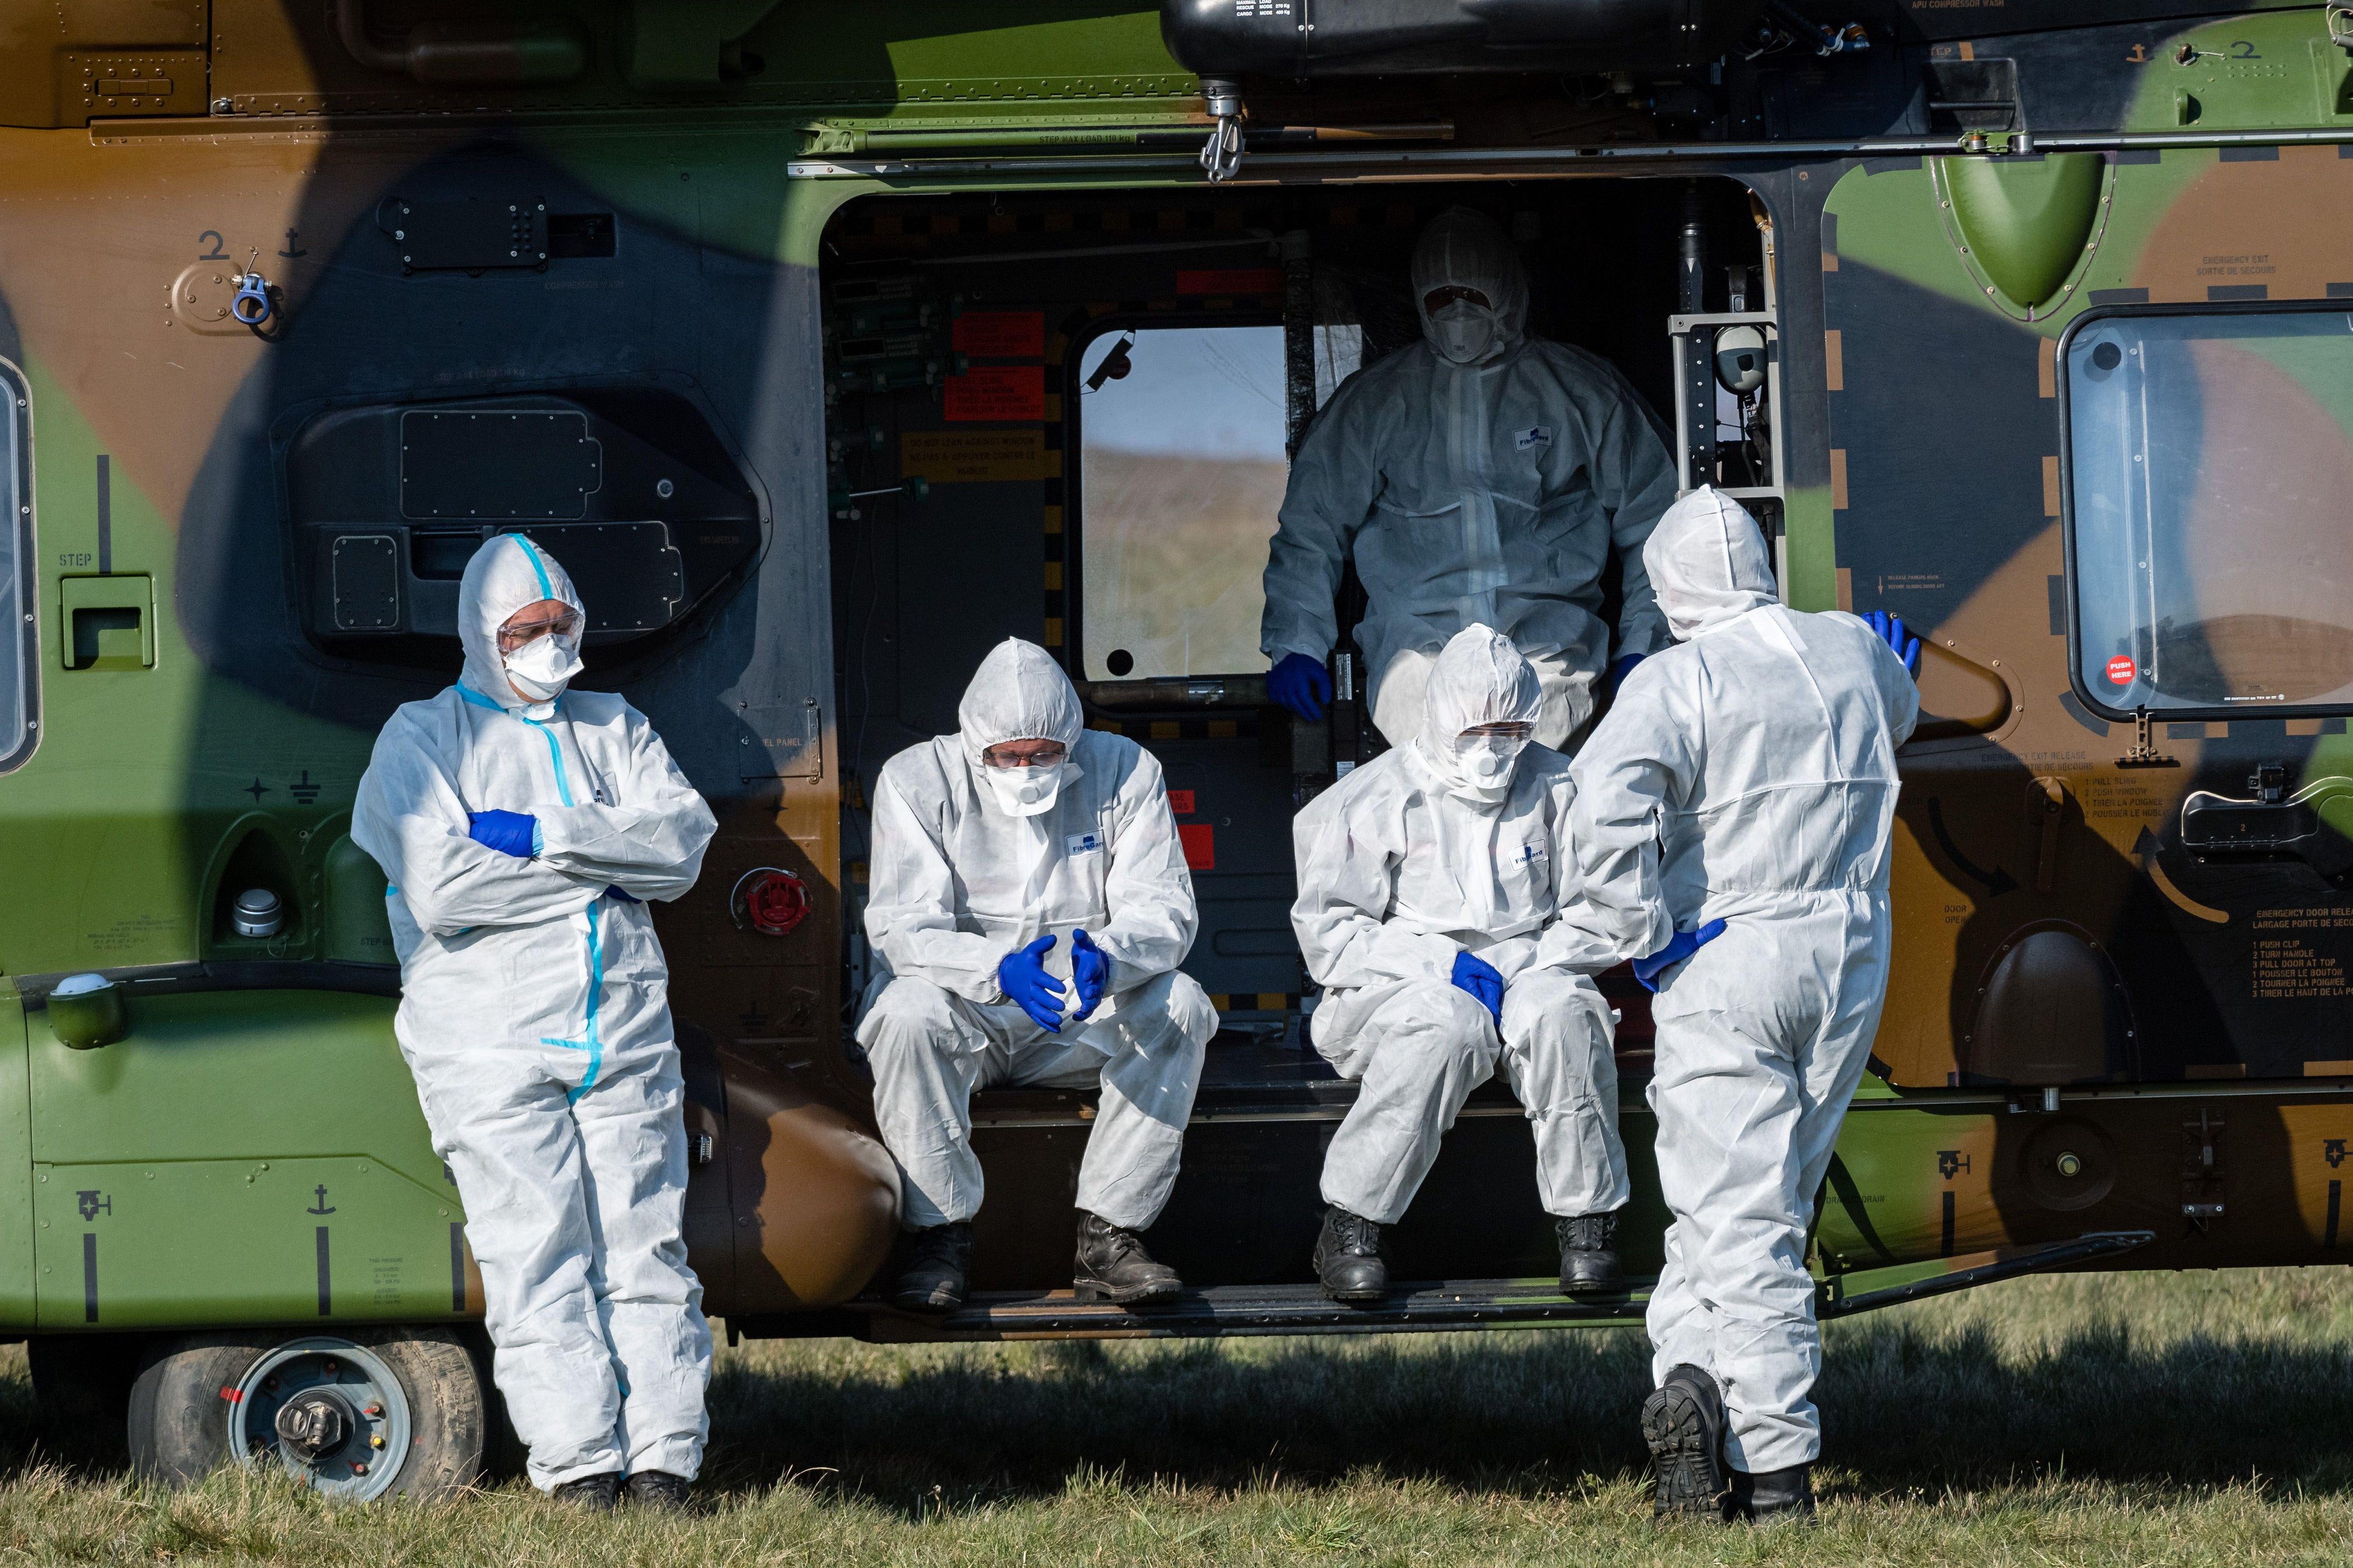 Five people in masks and protective suits are seen inside and in front of a vehicle.